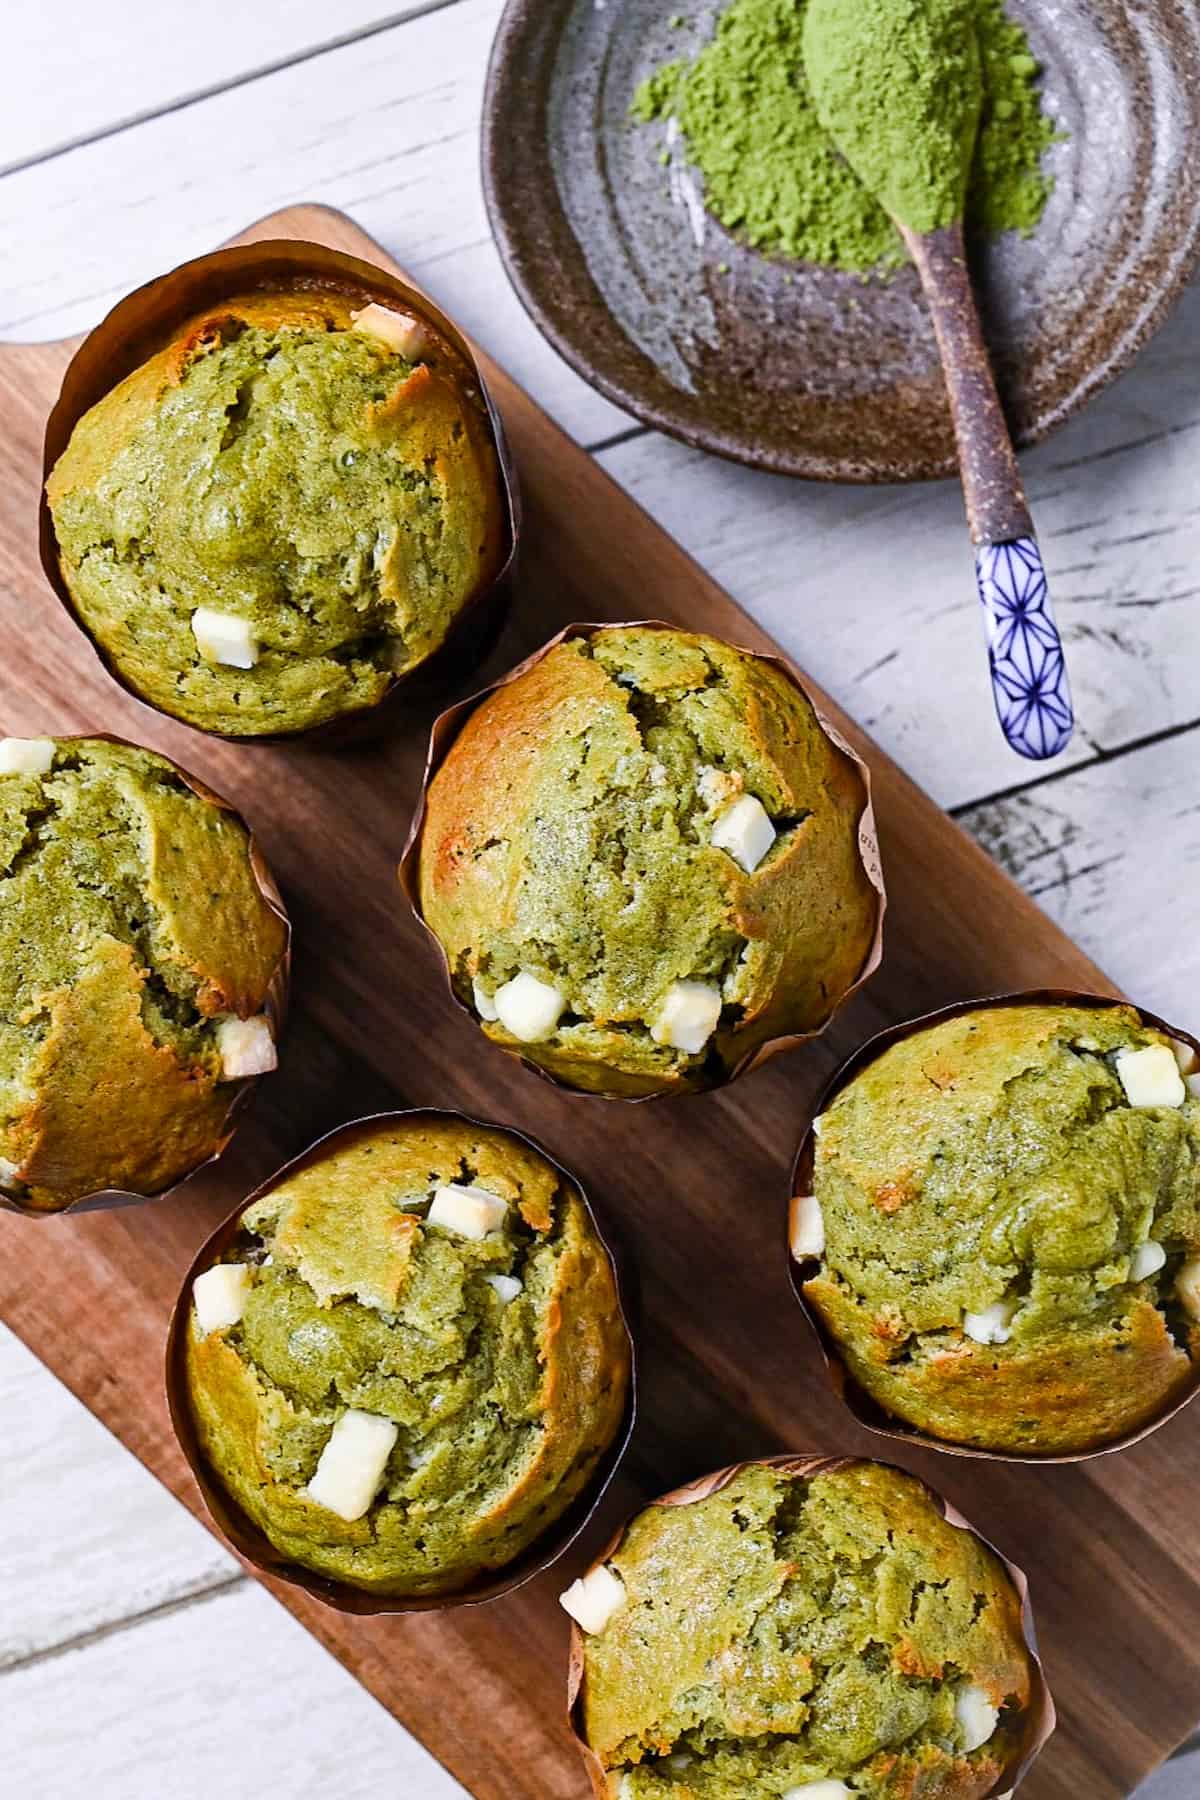 Matcha muffins with white chocolate chips on a wooden chopping board